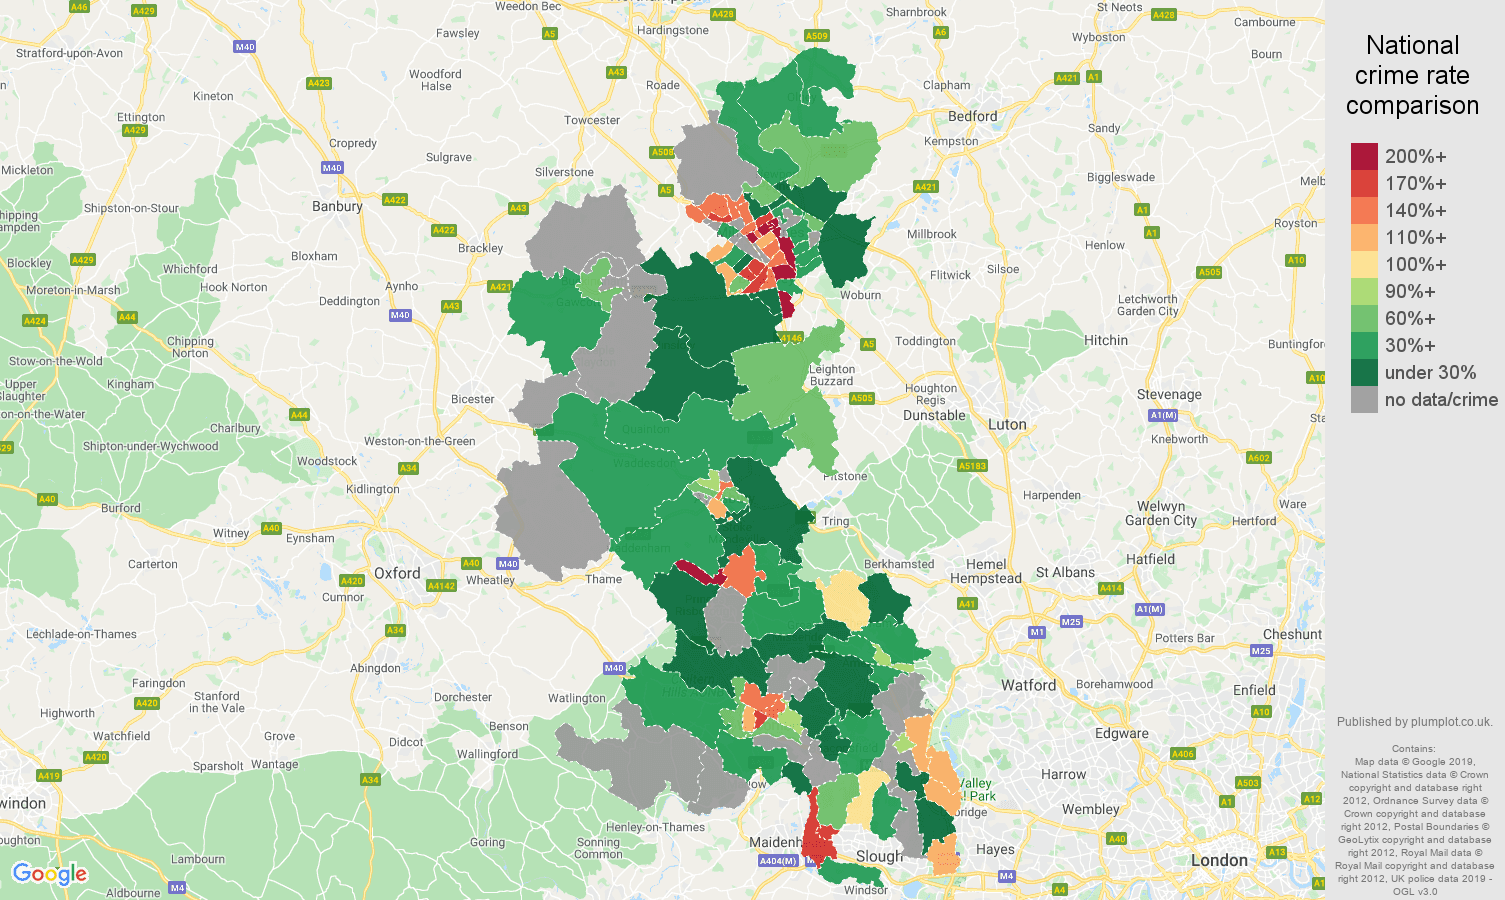 Buckinghamshire possession of weapons crime rate comparison map